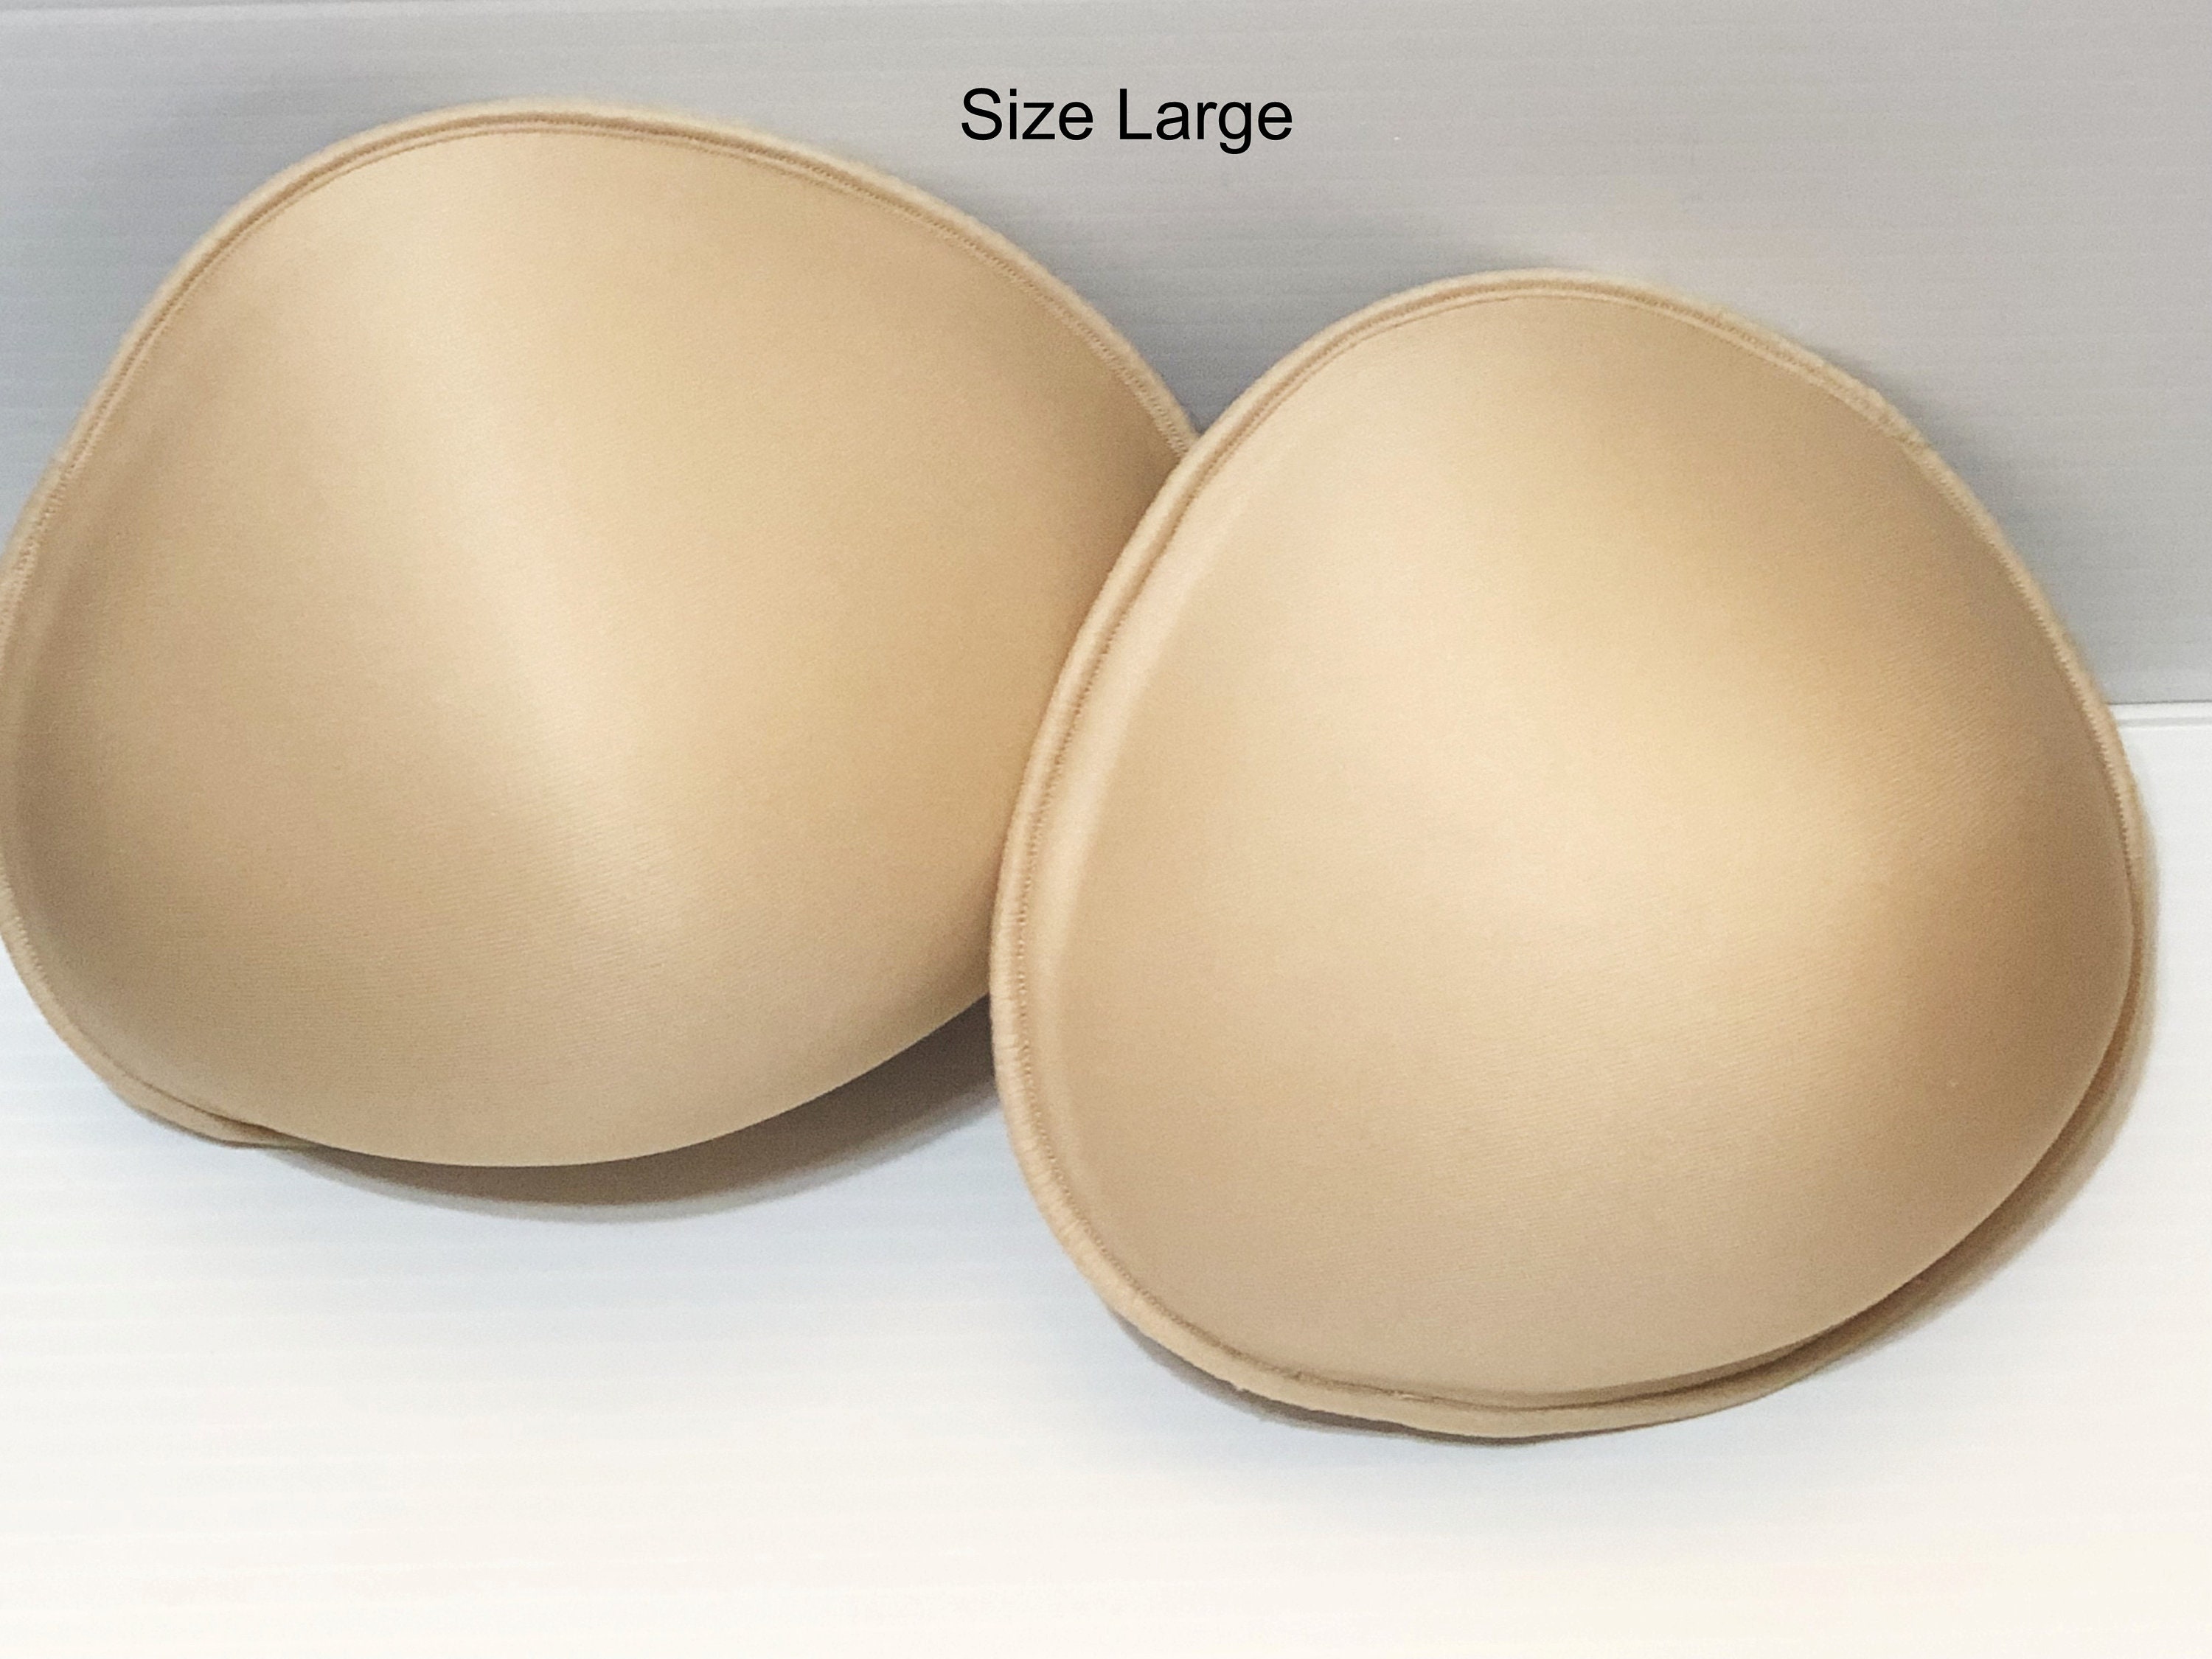 Bellcon Pushup Bra Pads for Sports Bra Pads Inserts Replacement